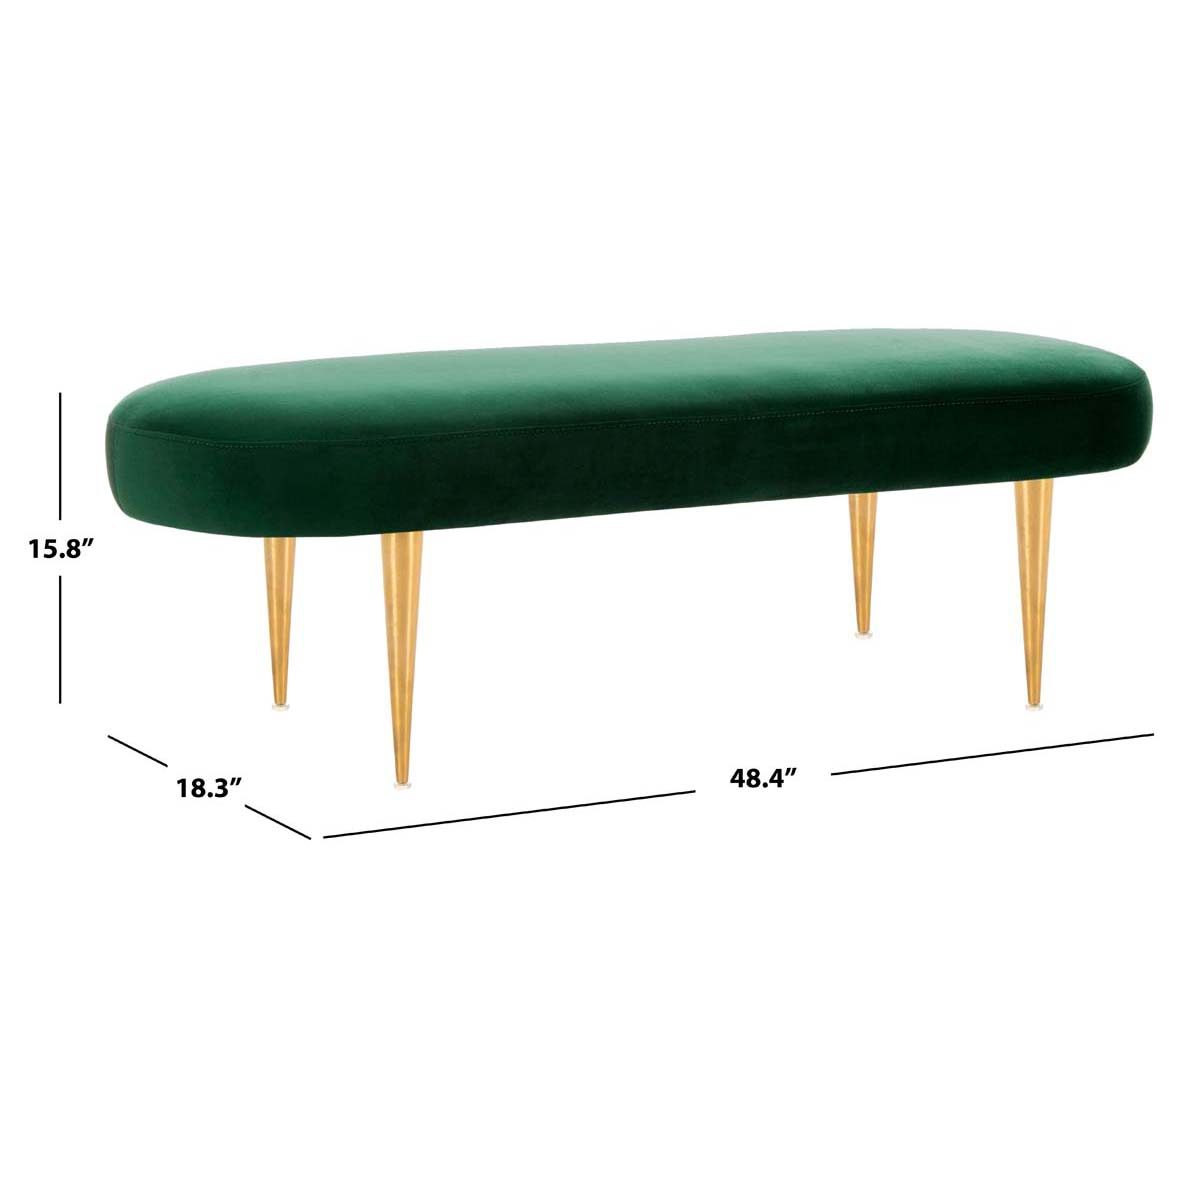 Safavieh Couture Corinne Oval Bench - Emerald